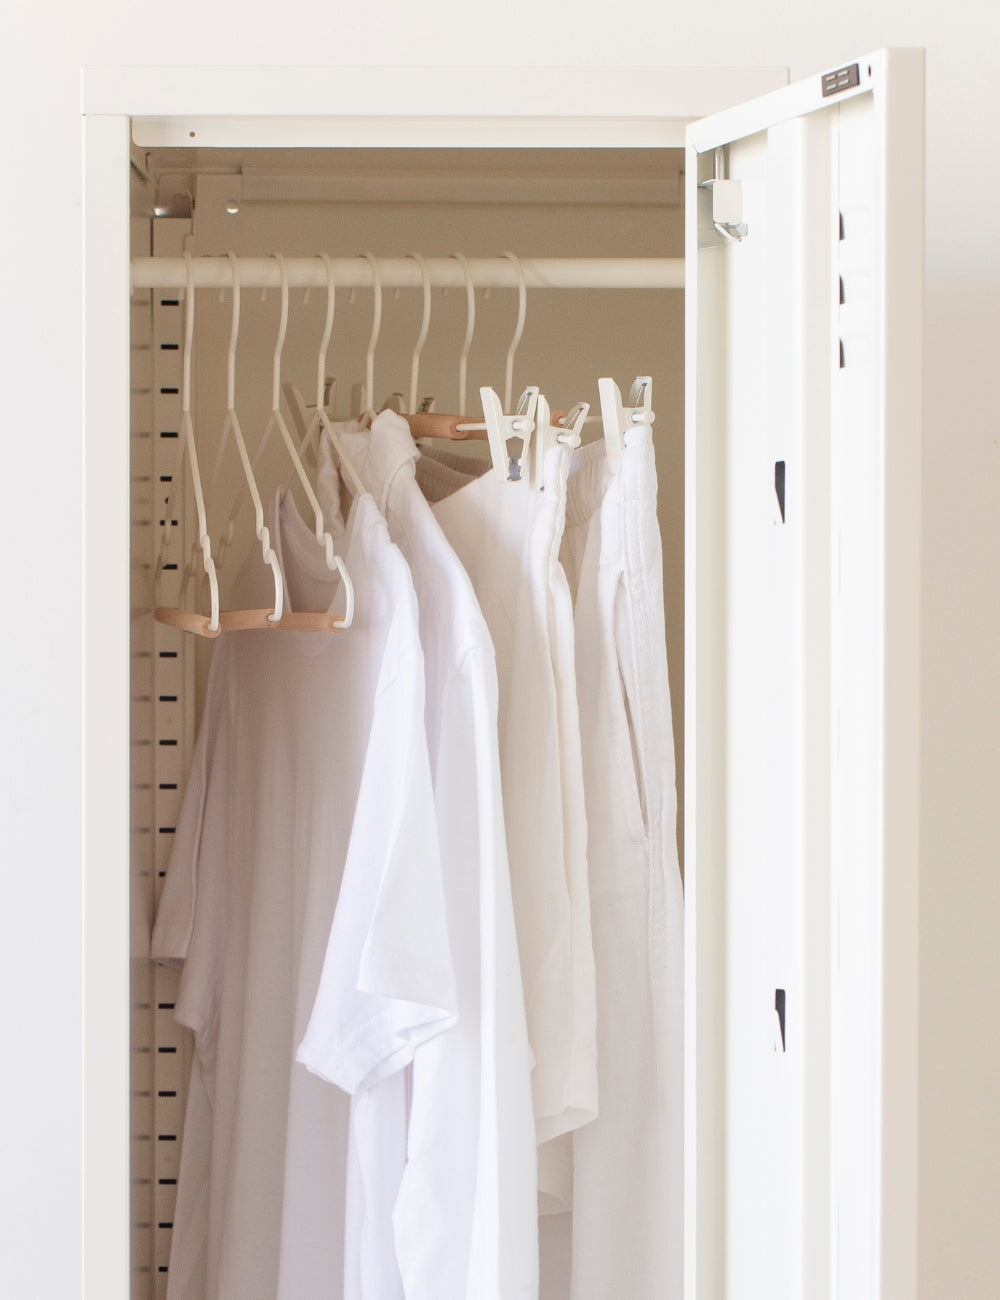 Mustard Made Adult Clip Hangers in White